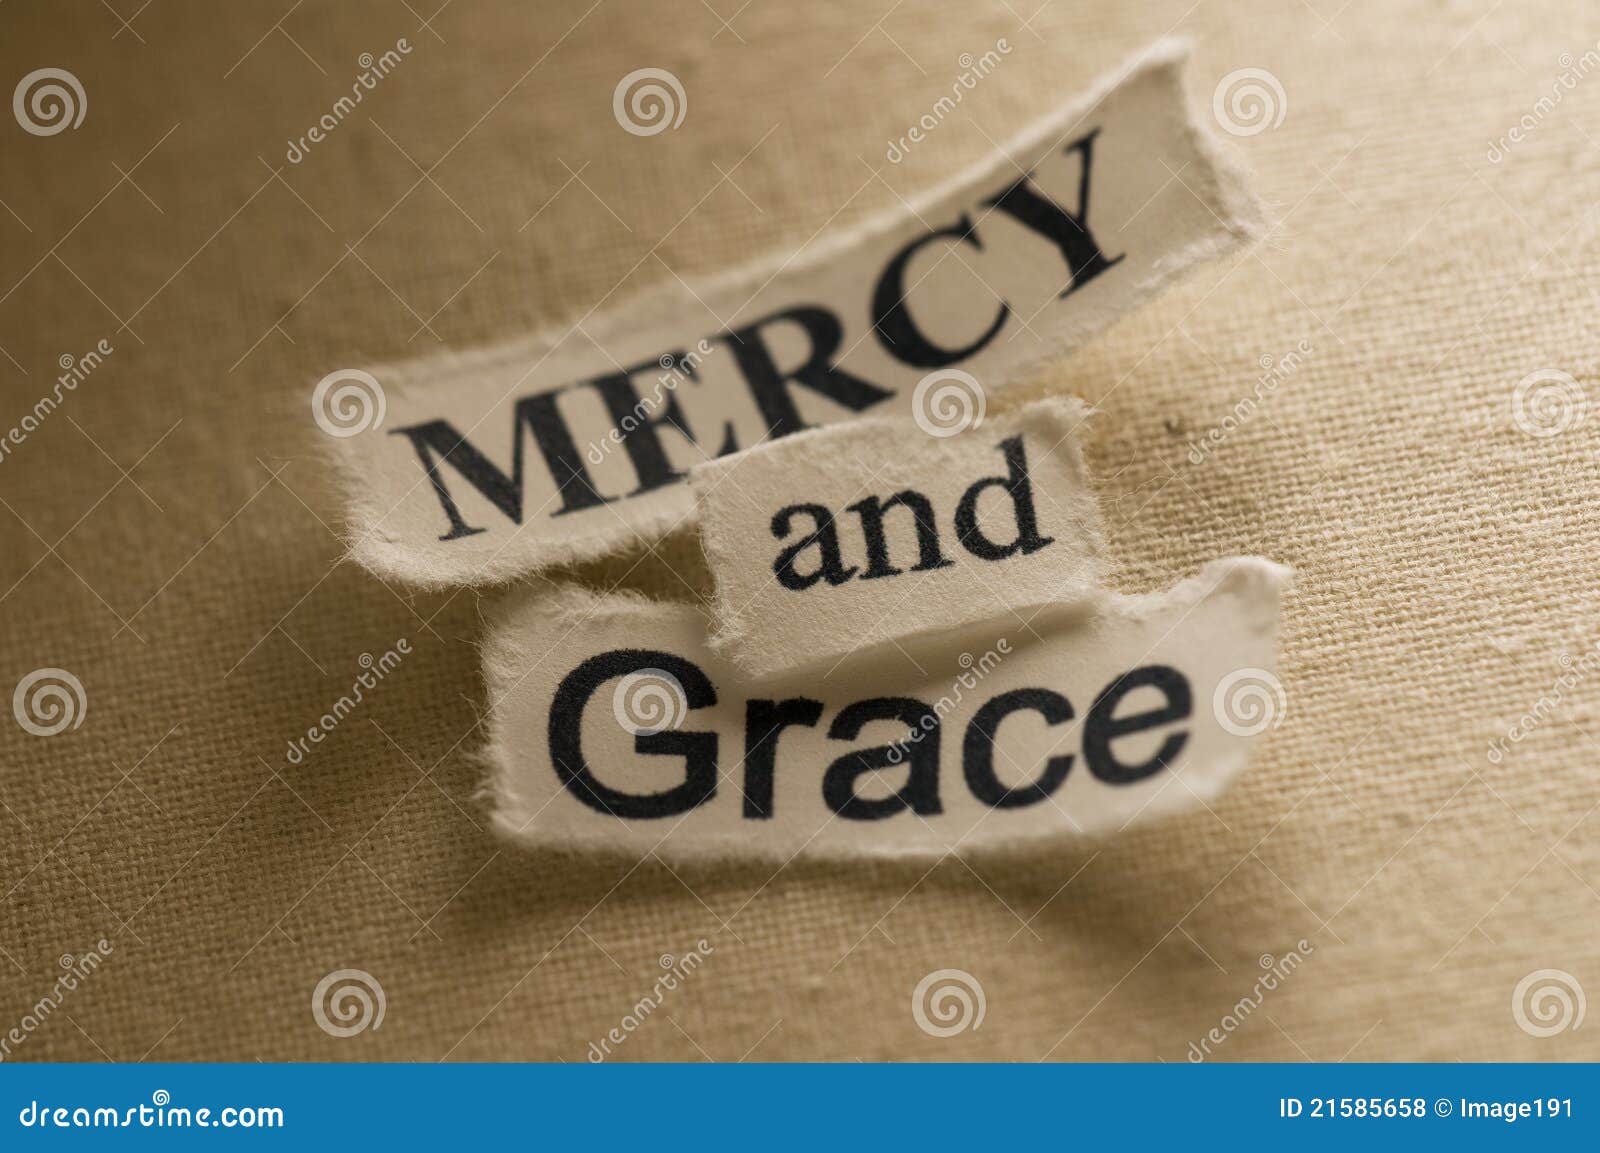 mercy and grace